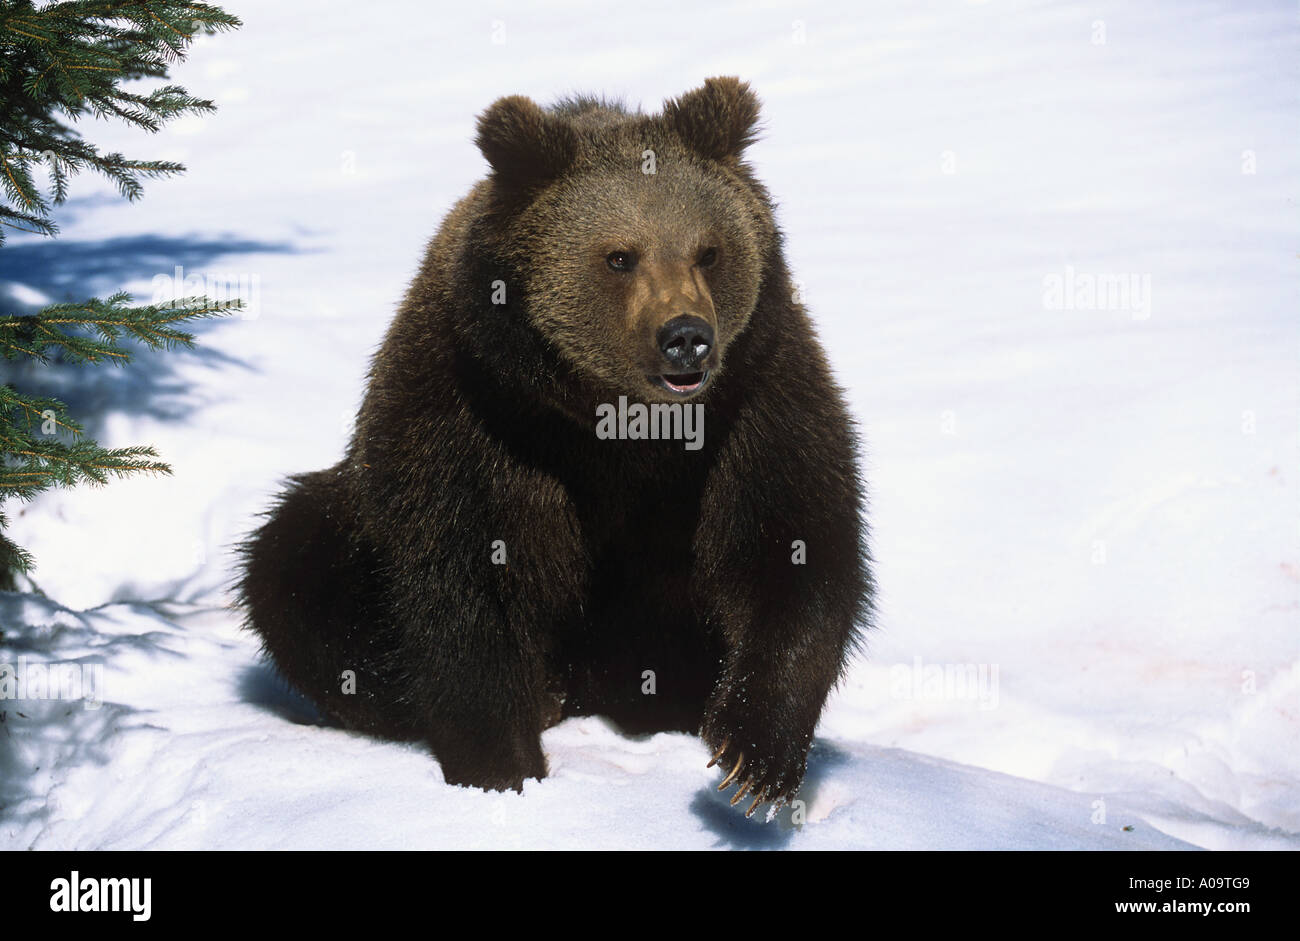 young brown bear sitting in snow Ursus arctos Stock Photo